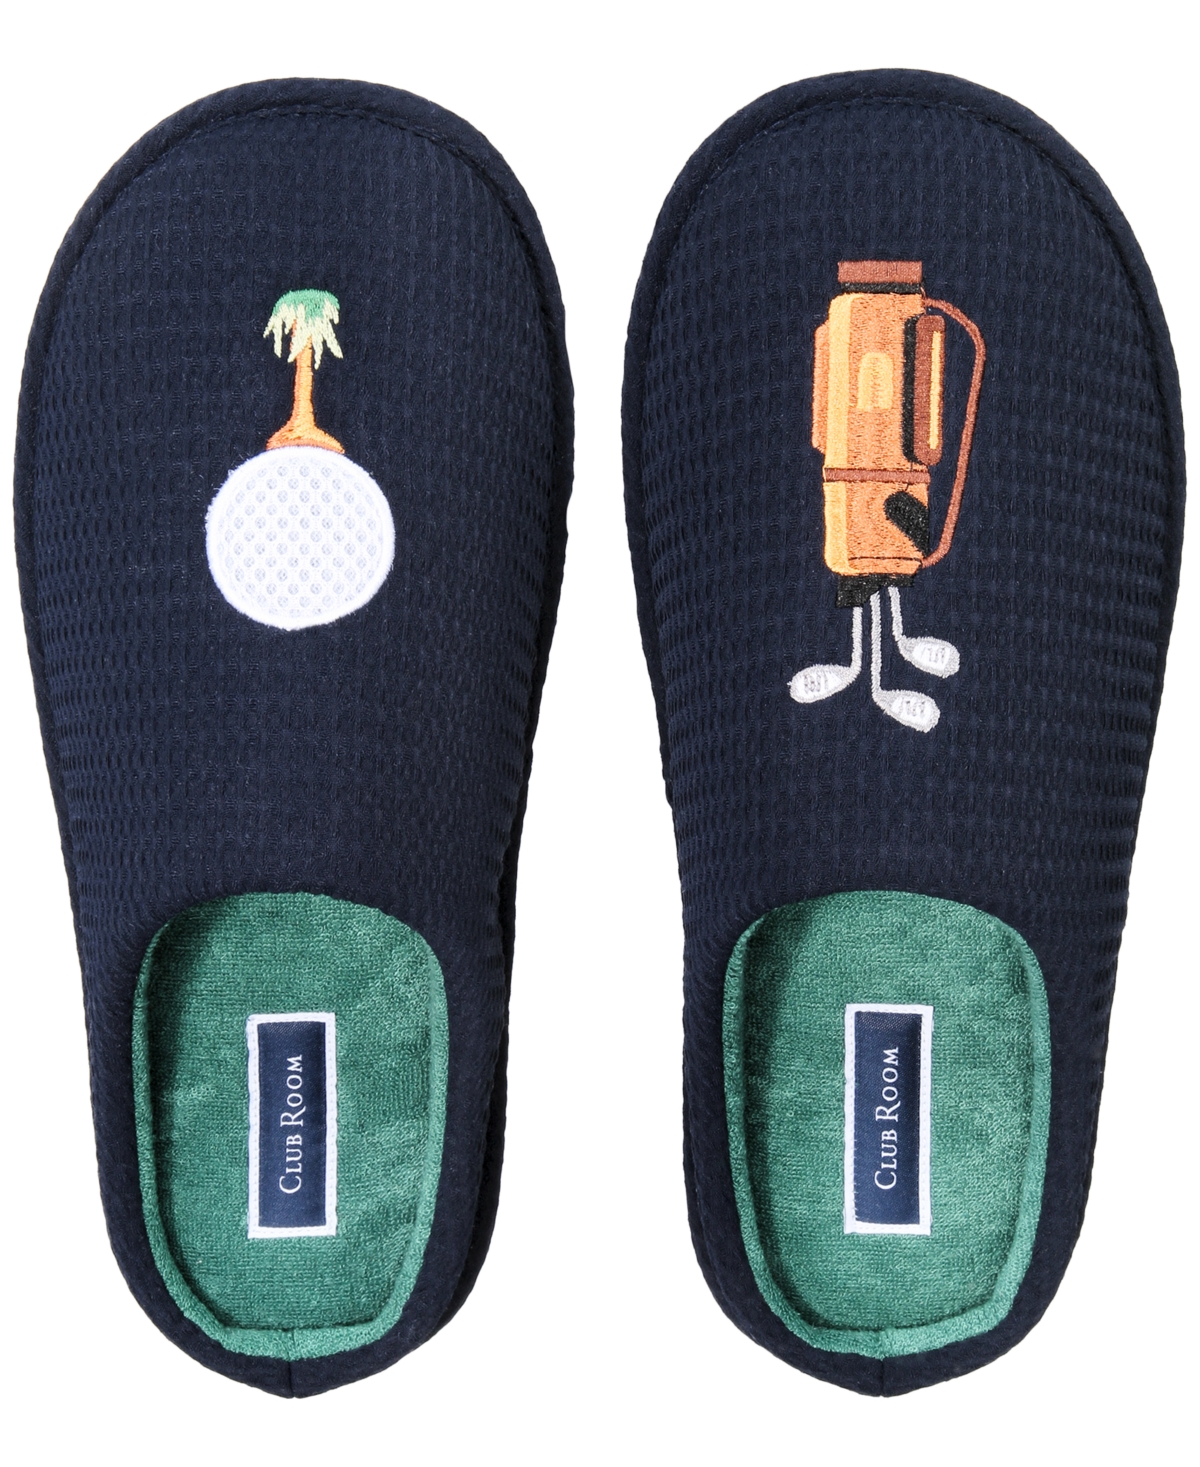 Men's Golf Embroidered Slippers, Created for Macy's - Blue